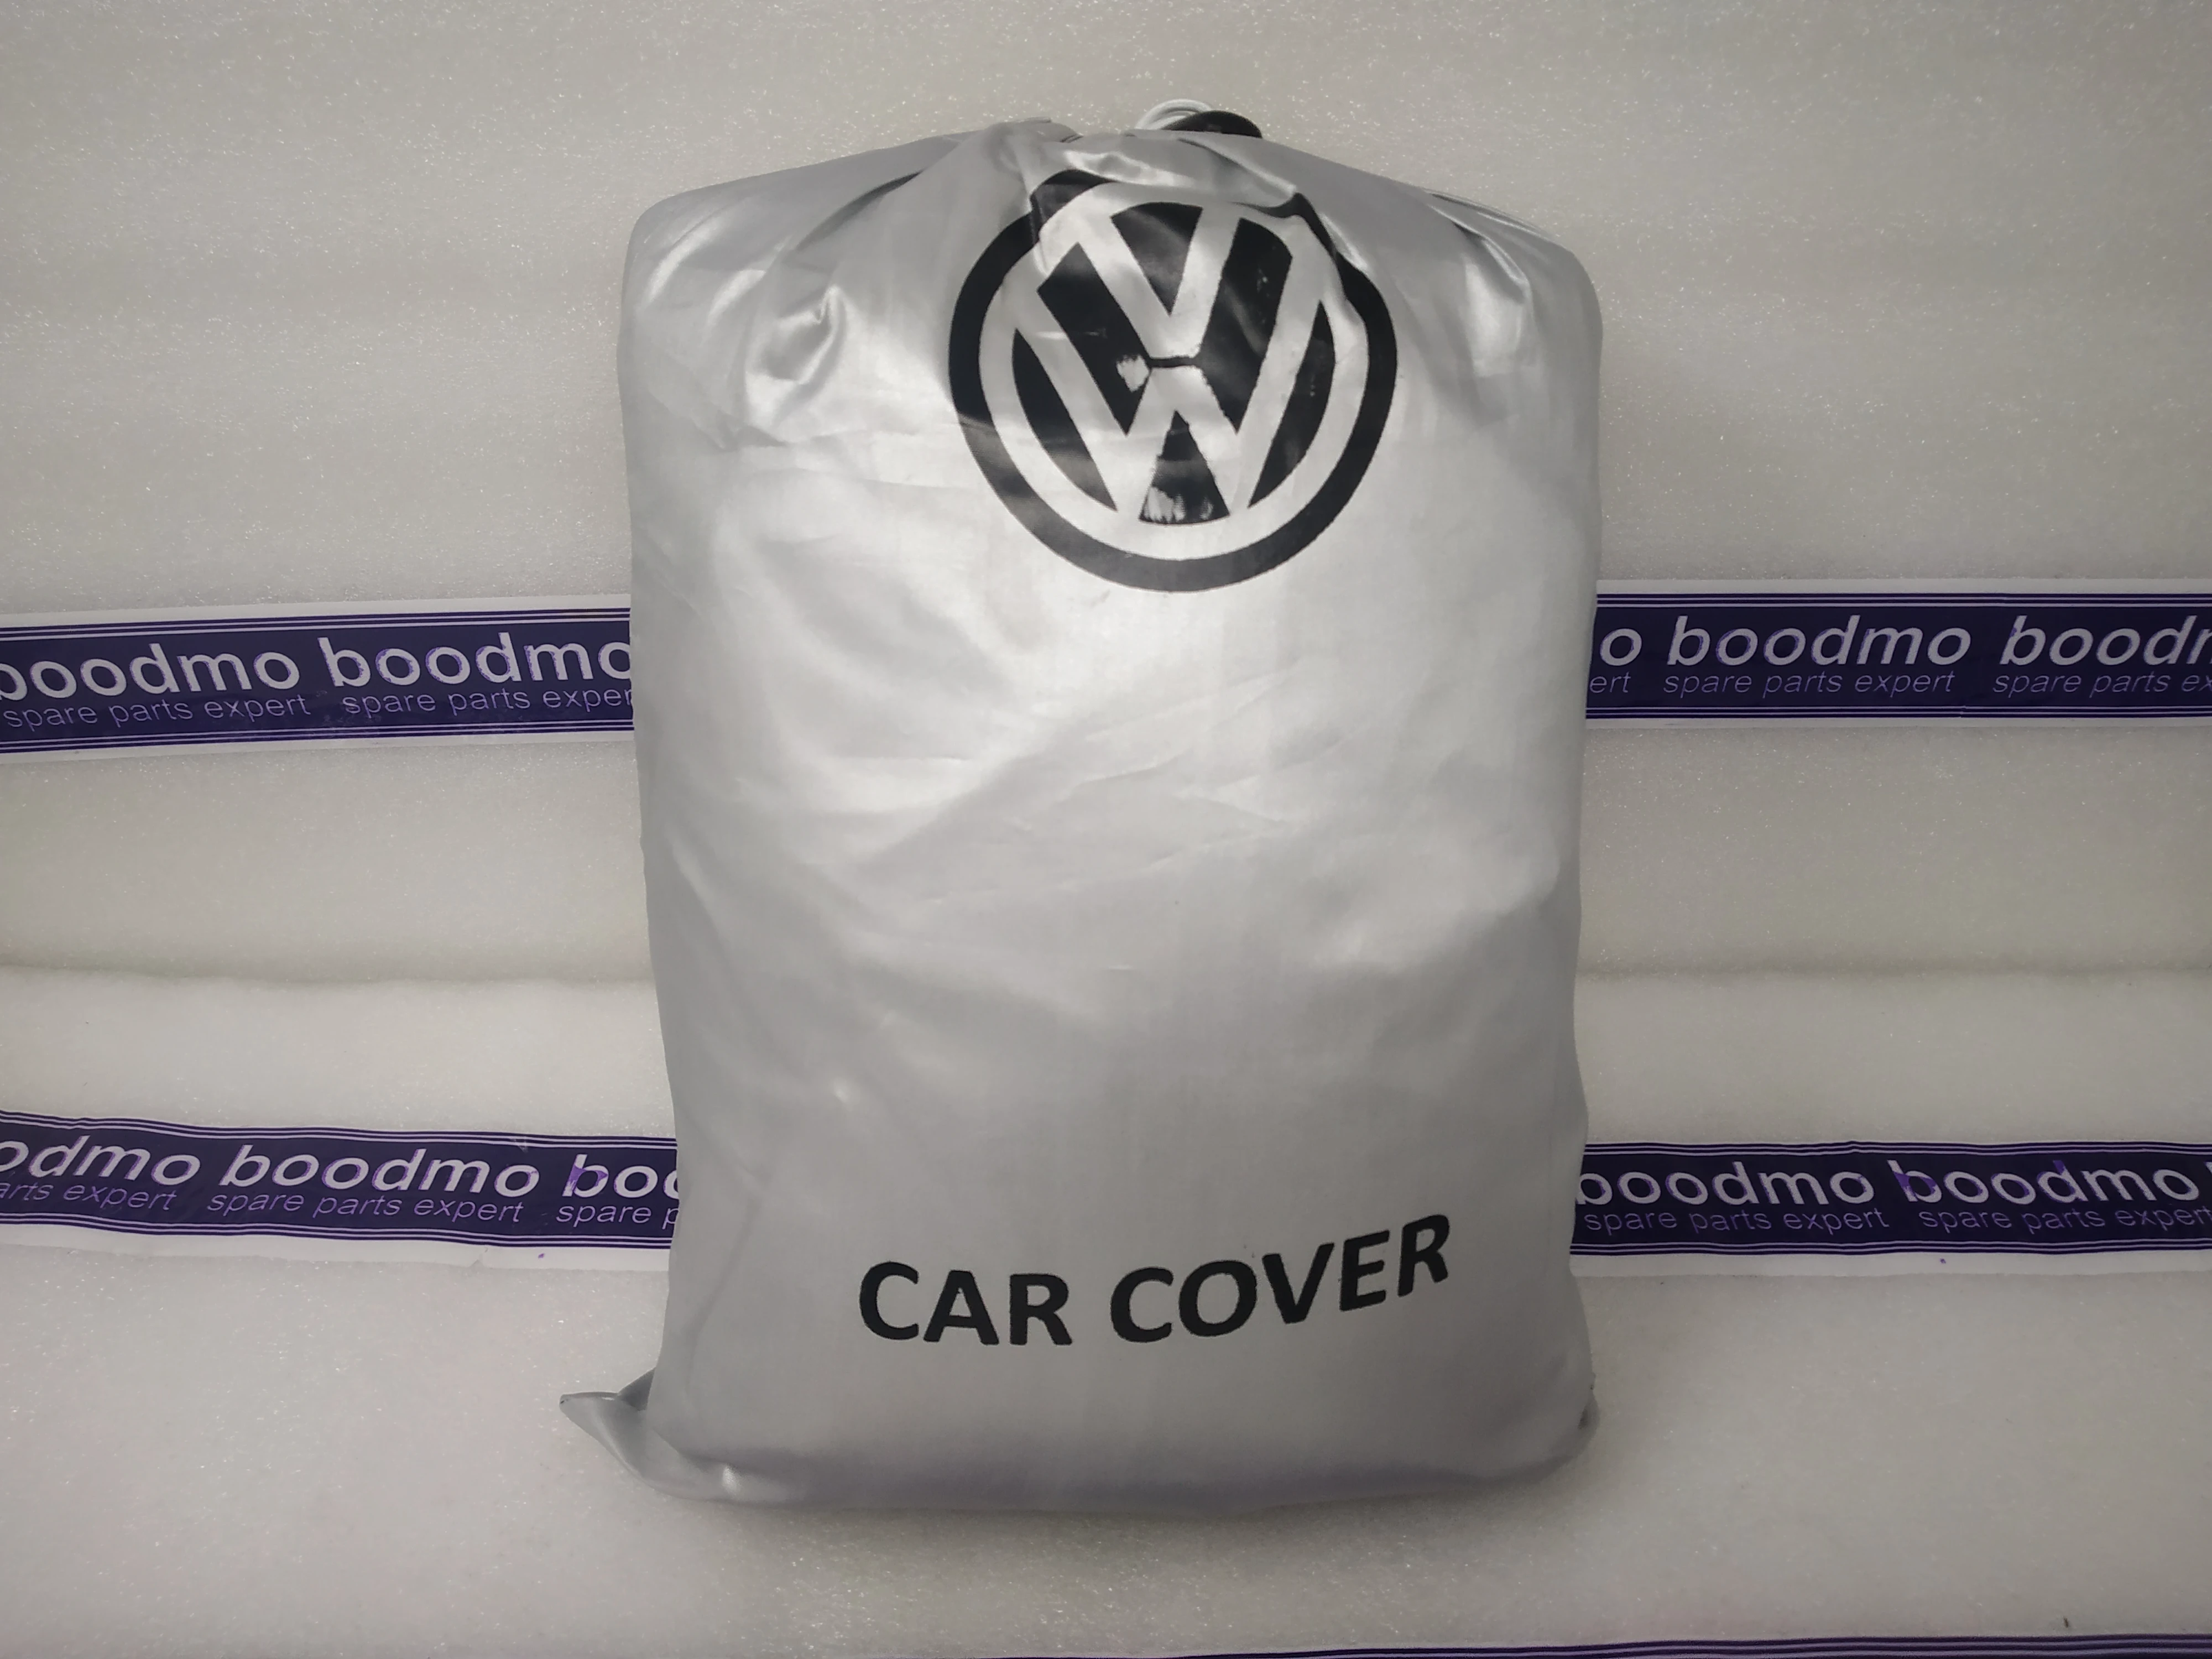 NEW CAR COVER POLO: VAG (VW, AUDI, SKODA) 6C0205 -compatibility,  features, prices. boodmo